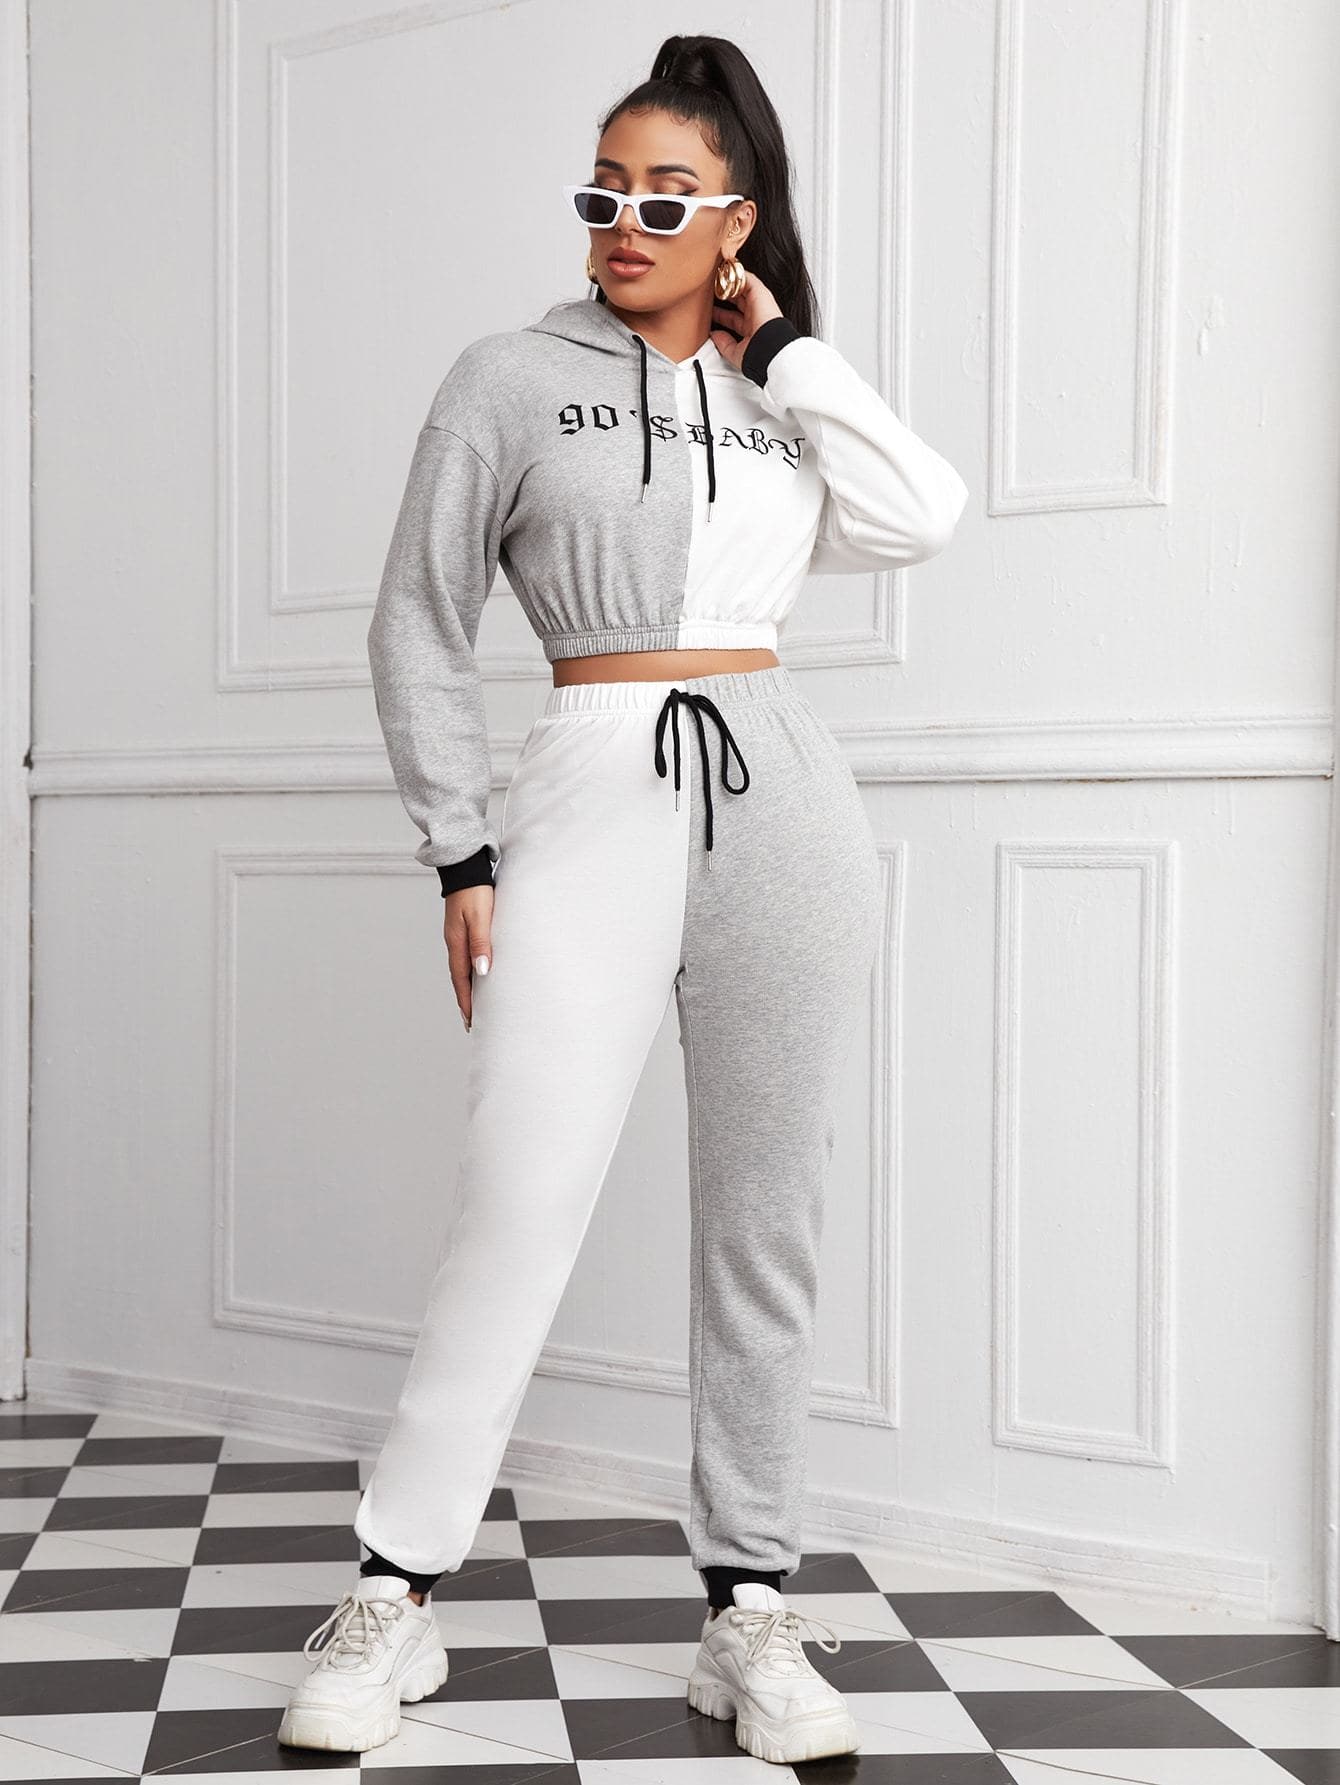 Drop Shoulder Spliced Letter Graphic Drawstring Hooded Top and Joggers Set